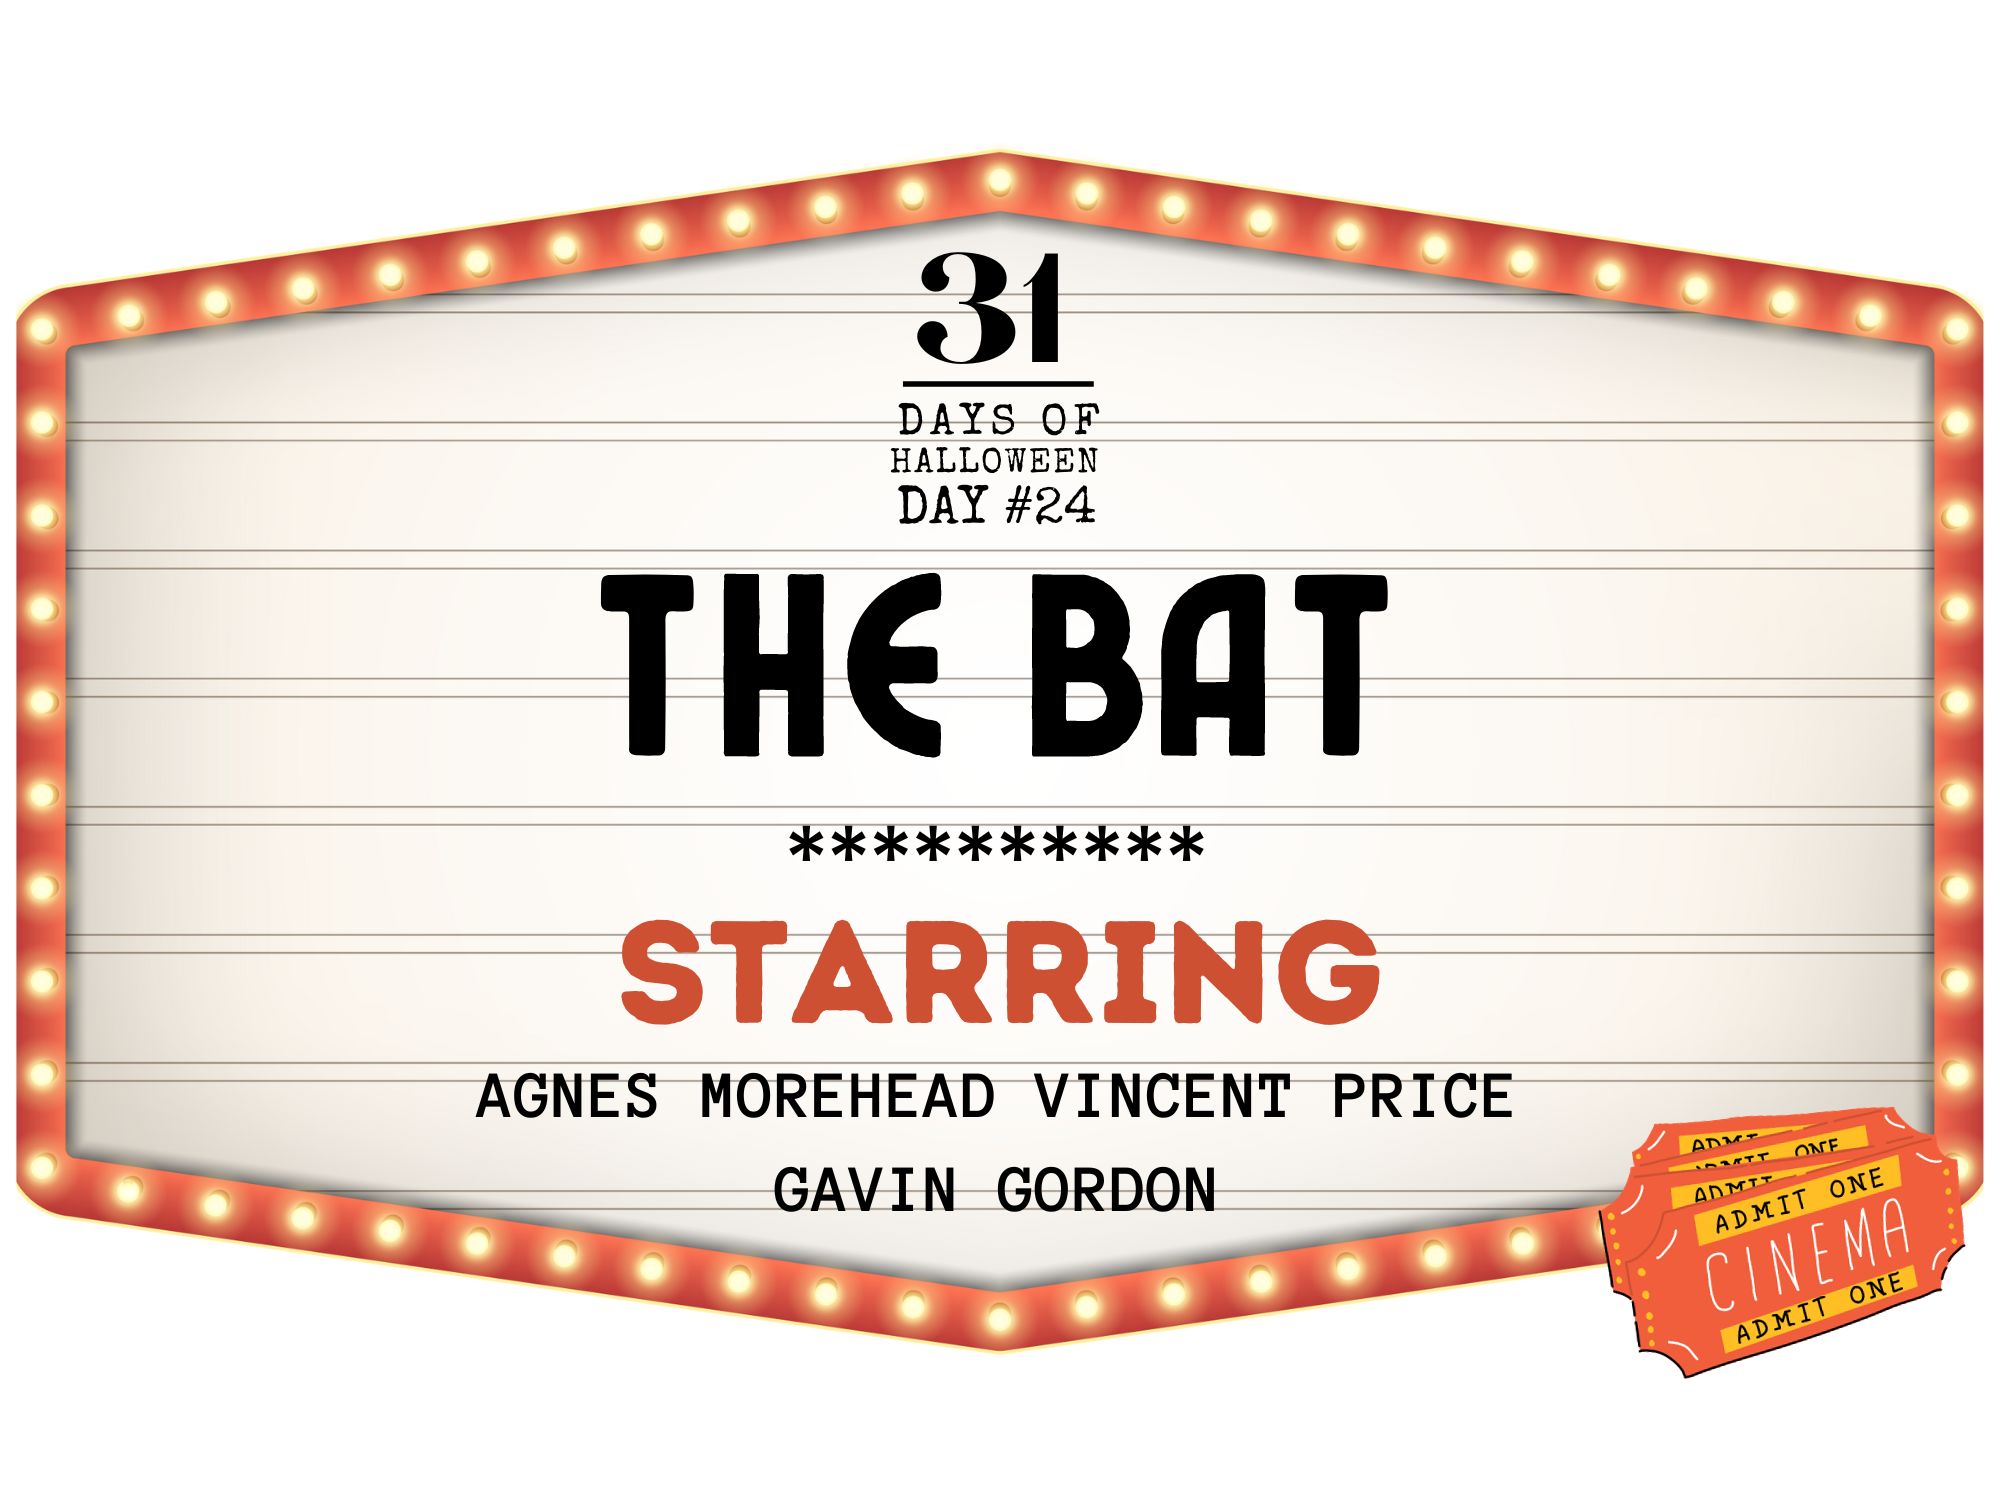 31 Days of Halloween: Day #24, The Bat (1959)